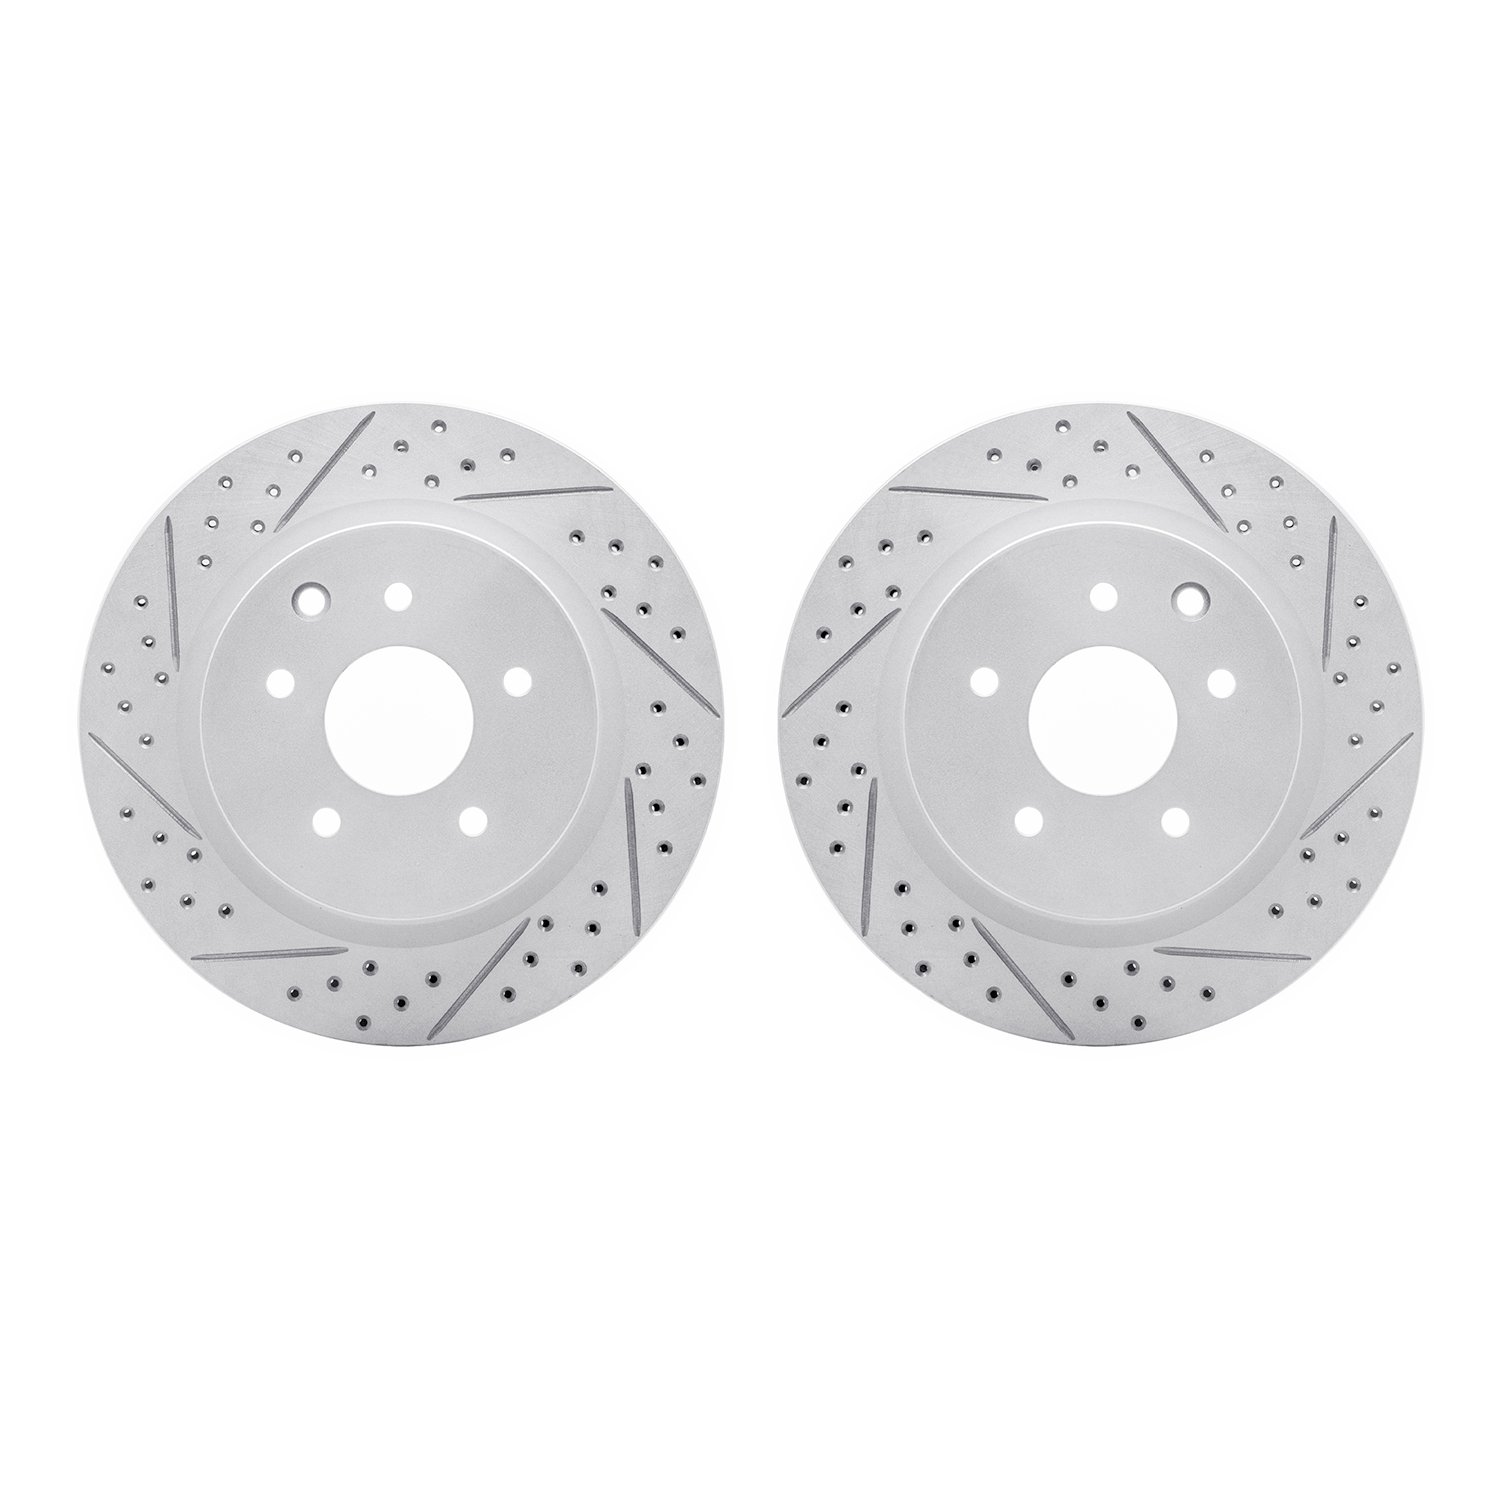 Geoperformance Drilled/Slotted Brake Rotors, Fits Select